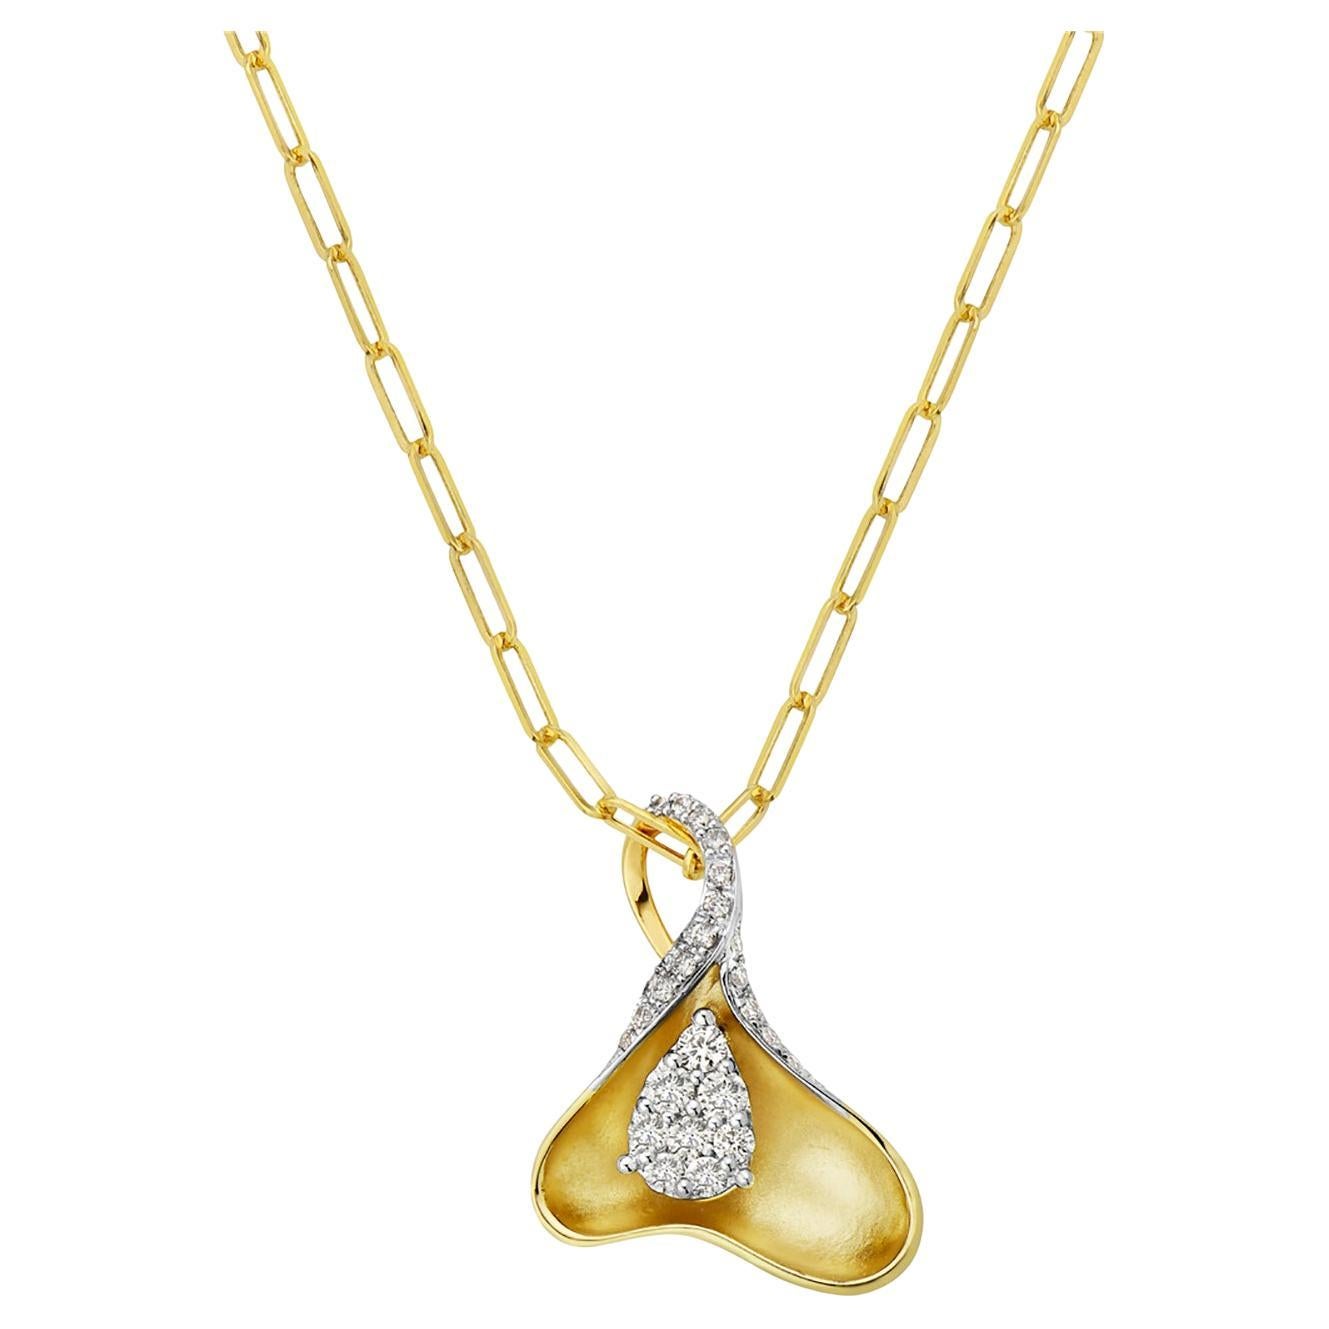 Curved Petal Shaped Pendant with Halo Diamonds Made in 14k Yellow Gold For Sale